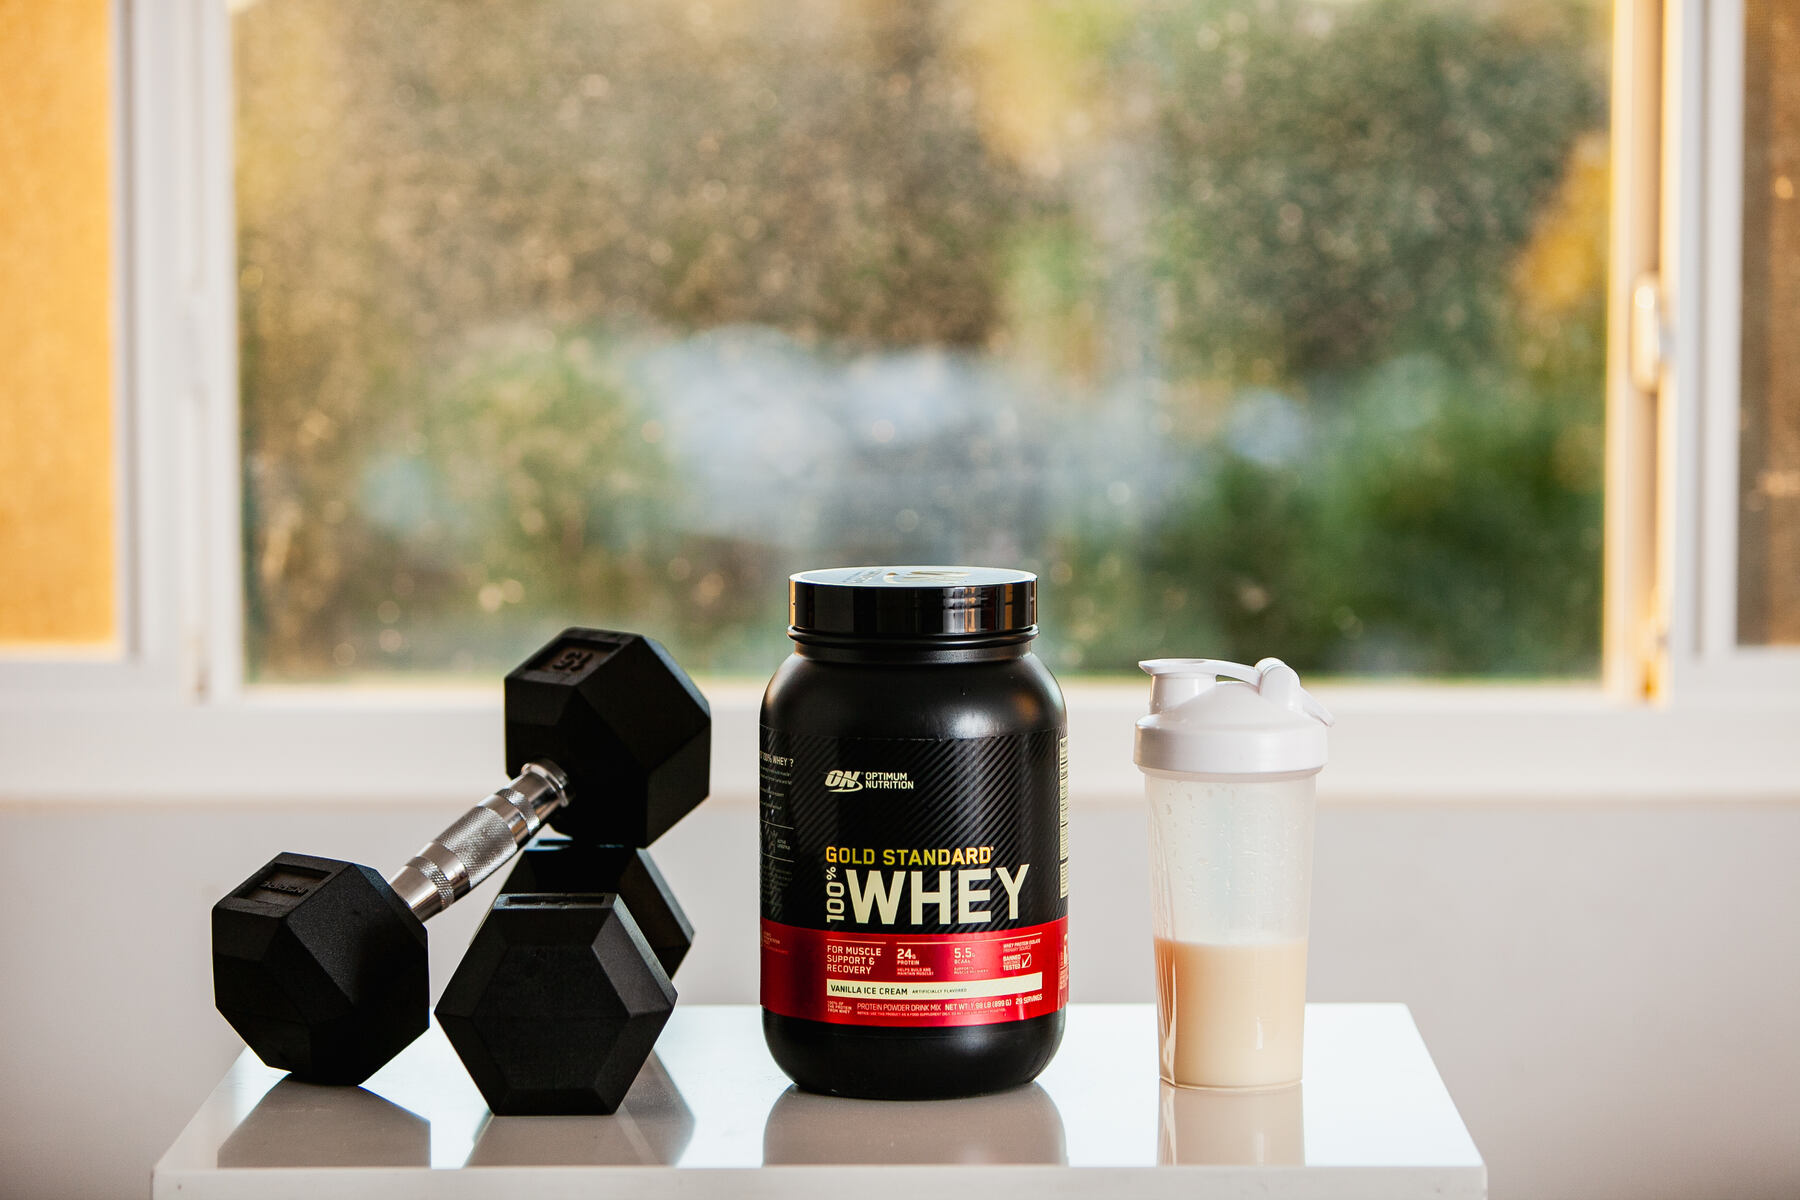 A black Gold Standard Whey Protein container and a white protein shaker filled on a white table, with a black dumbbell beside them and a window showing greenery outside.